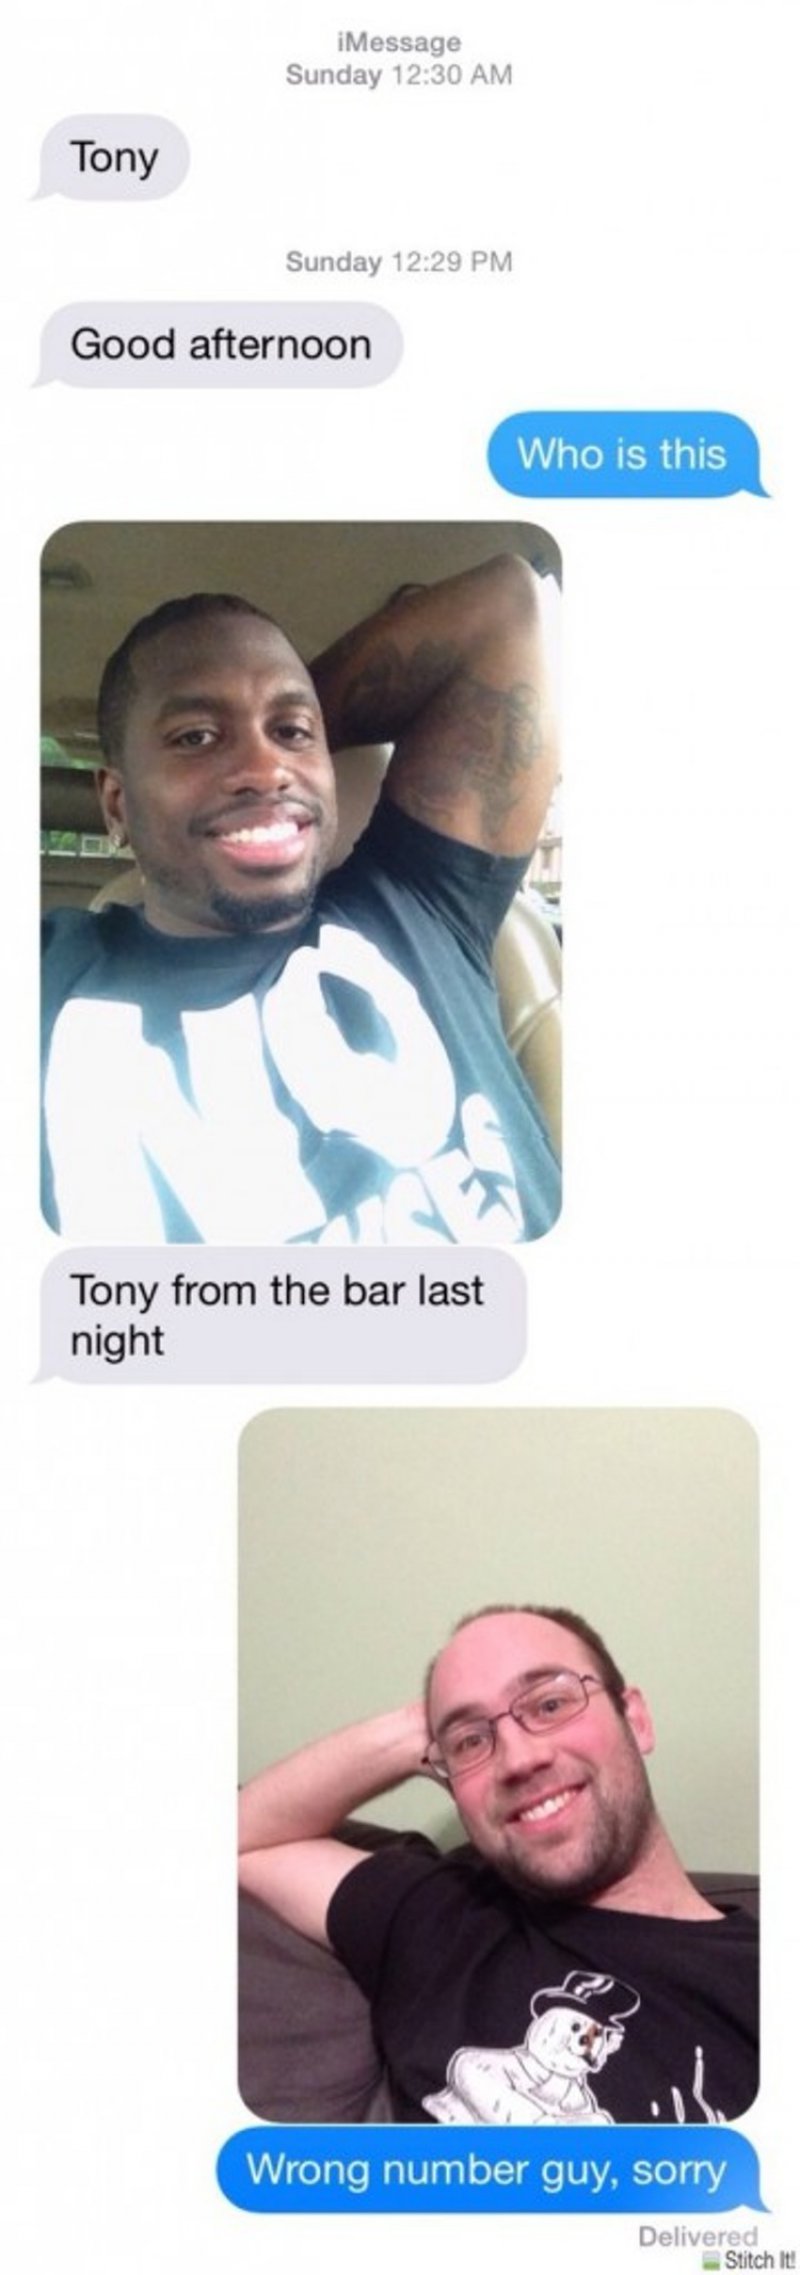 Tony Was Given a Fake Number as Well-15 Hilarious Wrong Number Conversations